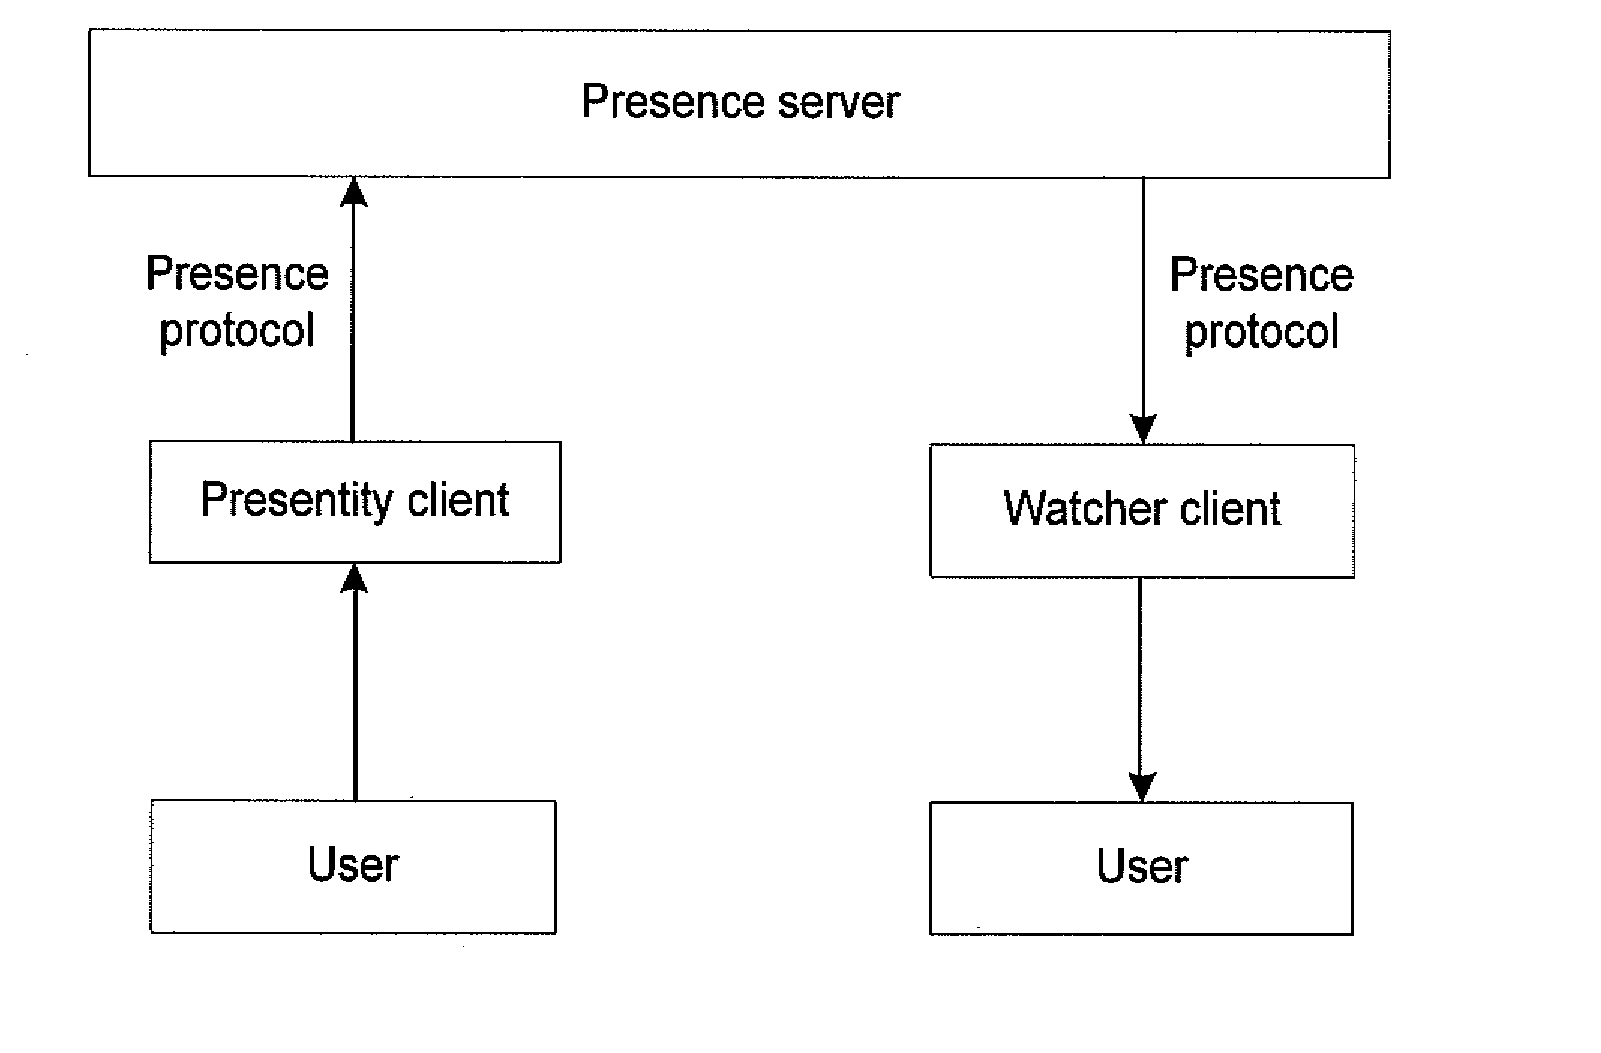 Method and apparatus for providing presence information